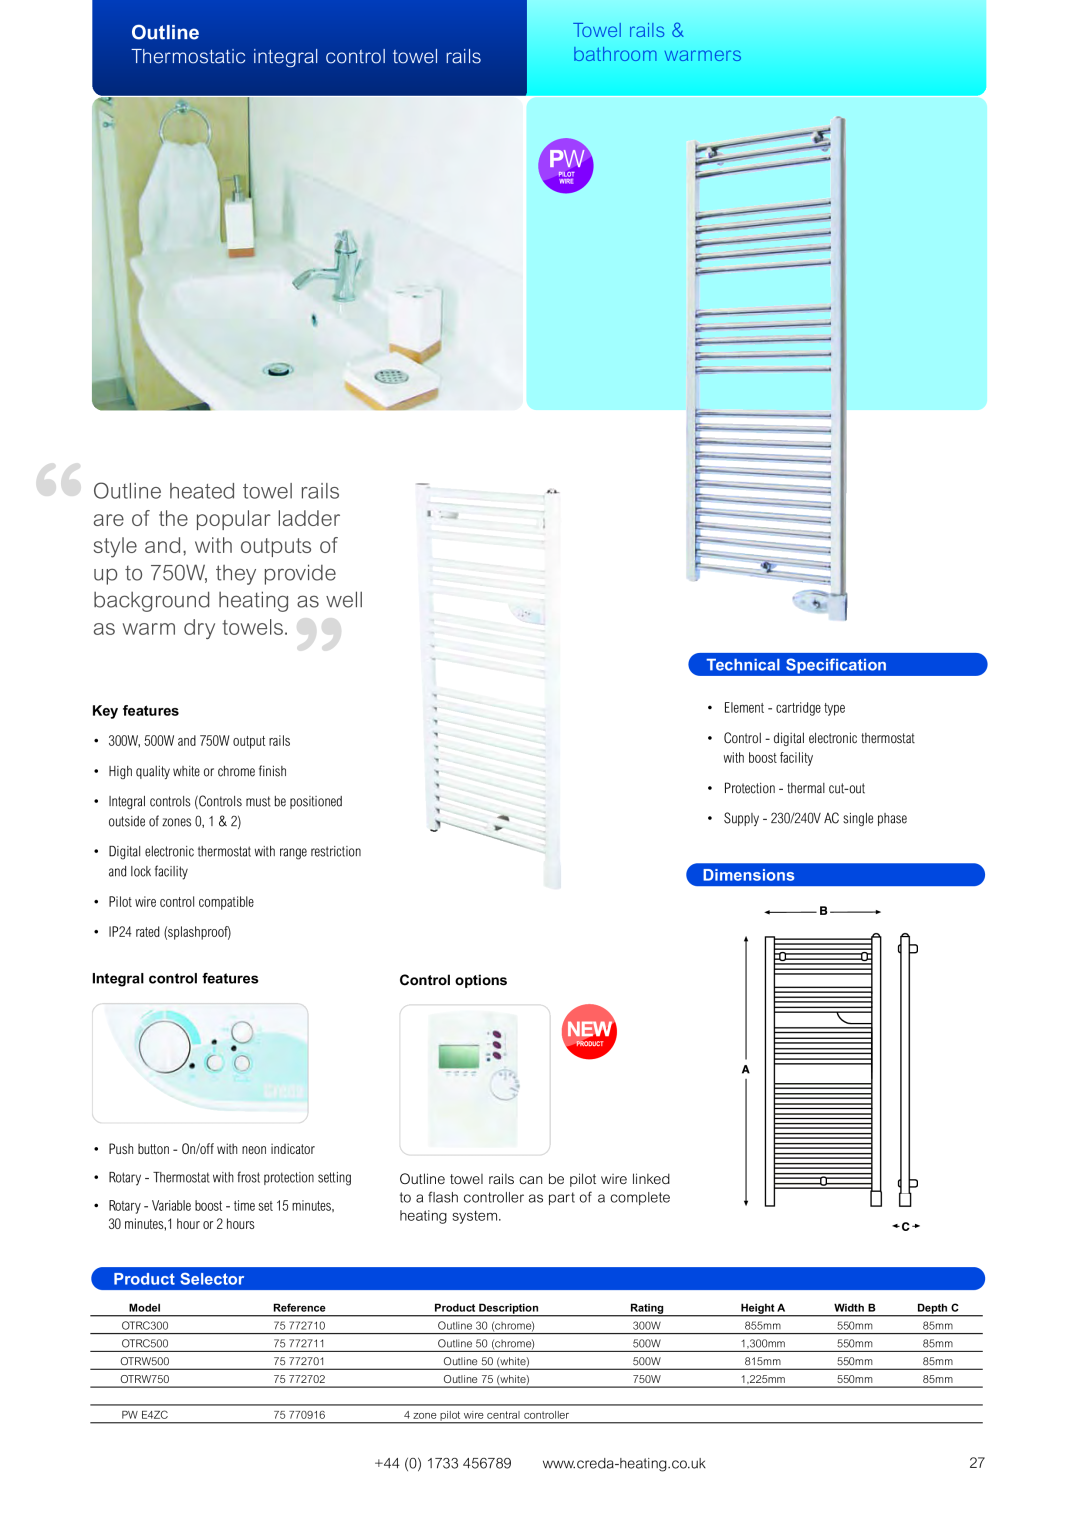 Creda Heating Solution manual background heating as well as warm dry towels. ”, Outline, Towel rails & bathroom warmers 